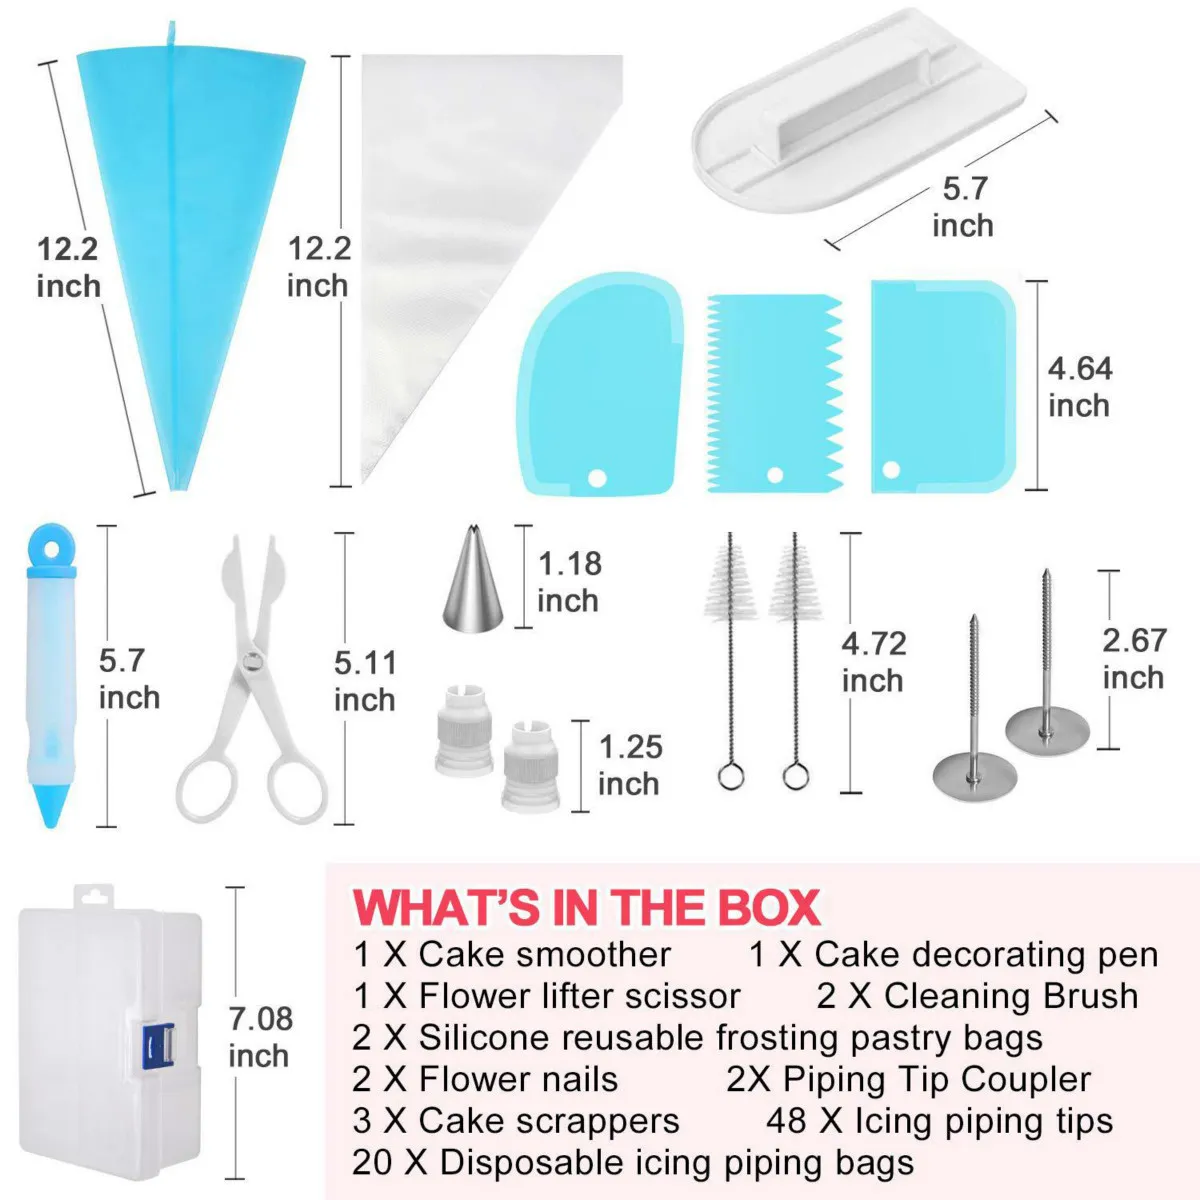 Icing Piping Tips Set with Storage Box Cake Decorating Supplies Kit Icing Nozzles Pastry Piping Bags Smoother 201023